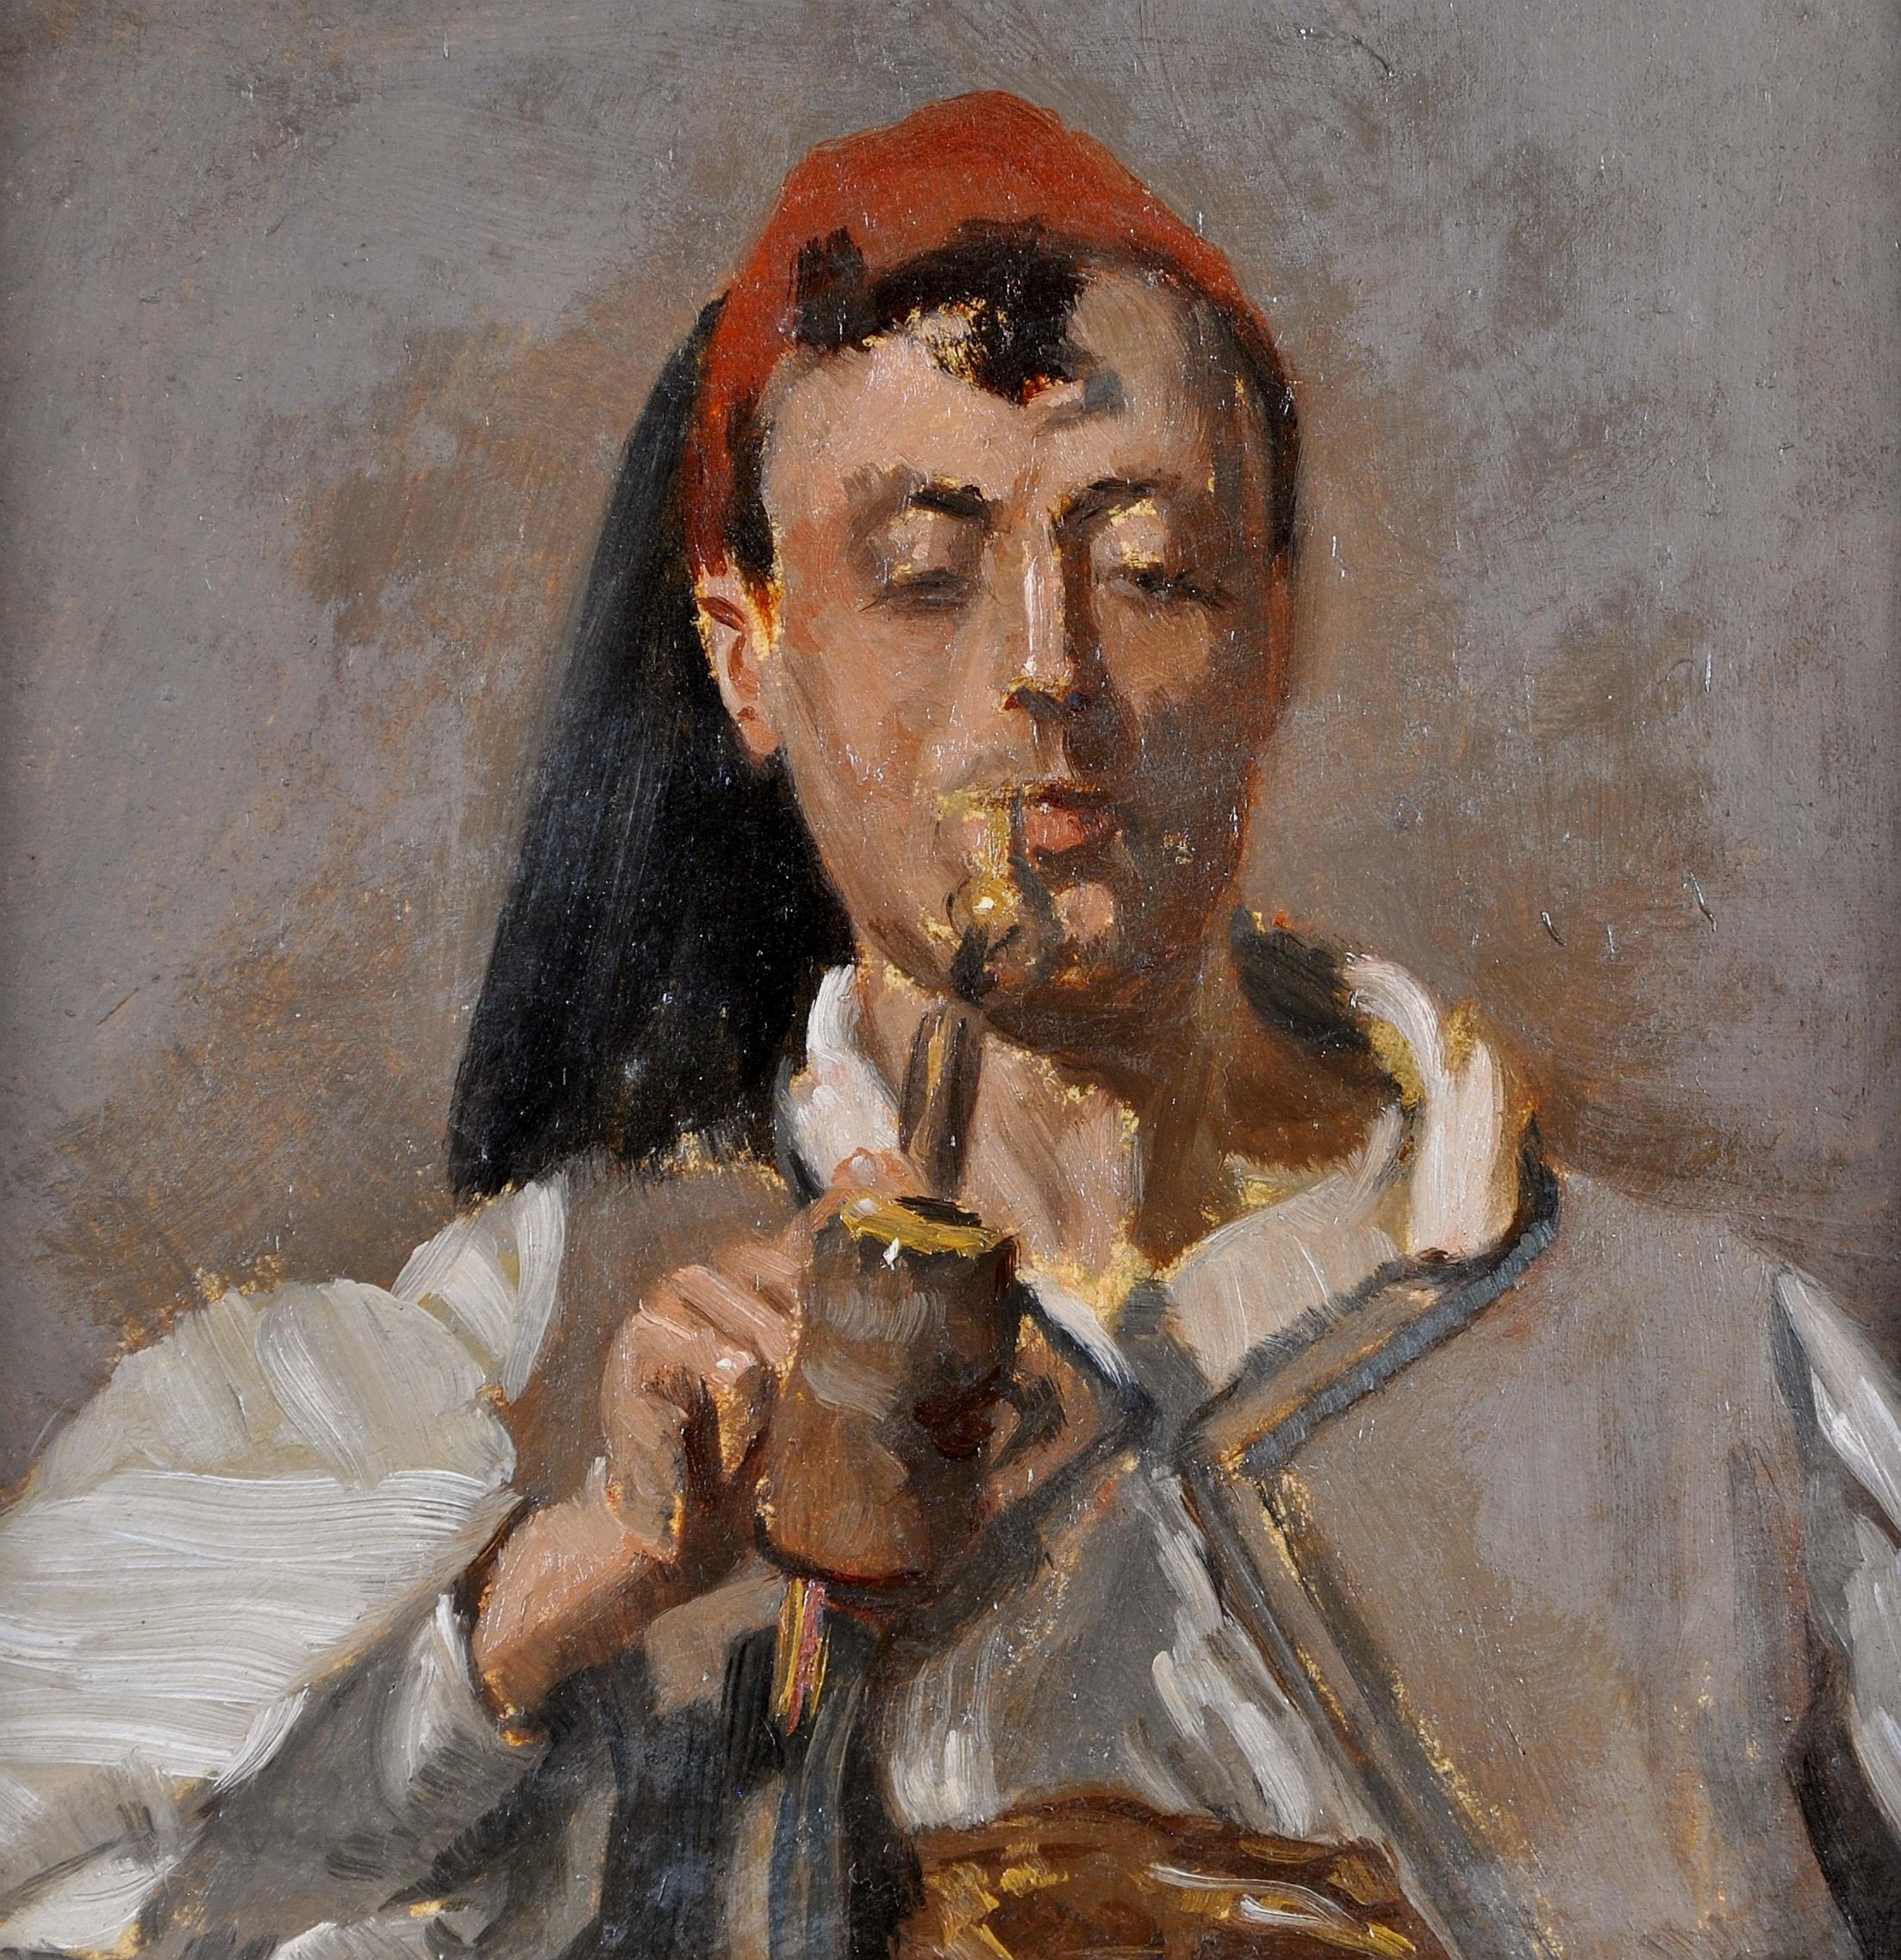 North African Man Smoking a Pipe - Antique British Orientalist Portrait Painting For Sale 3